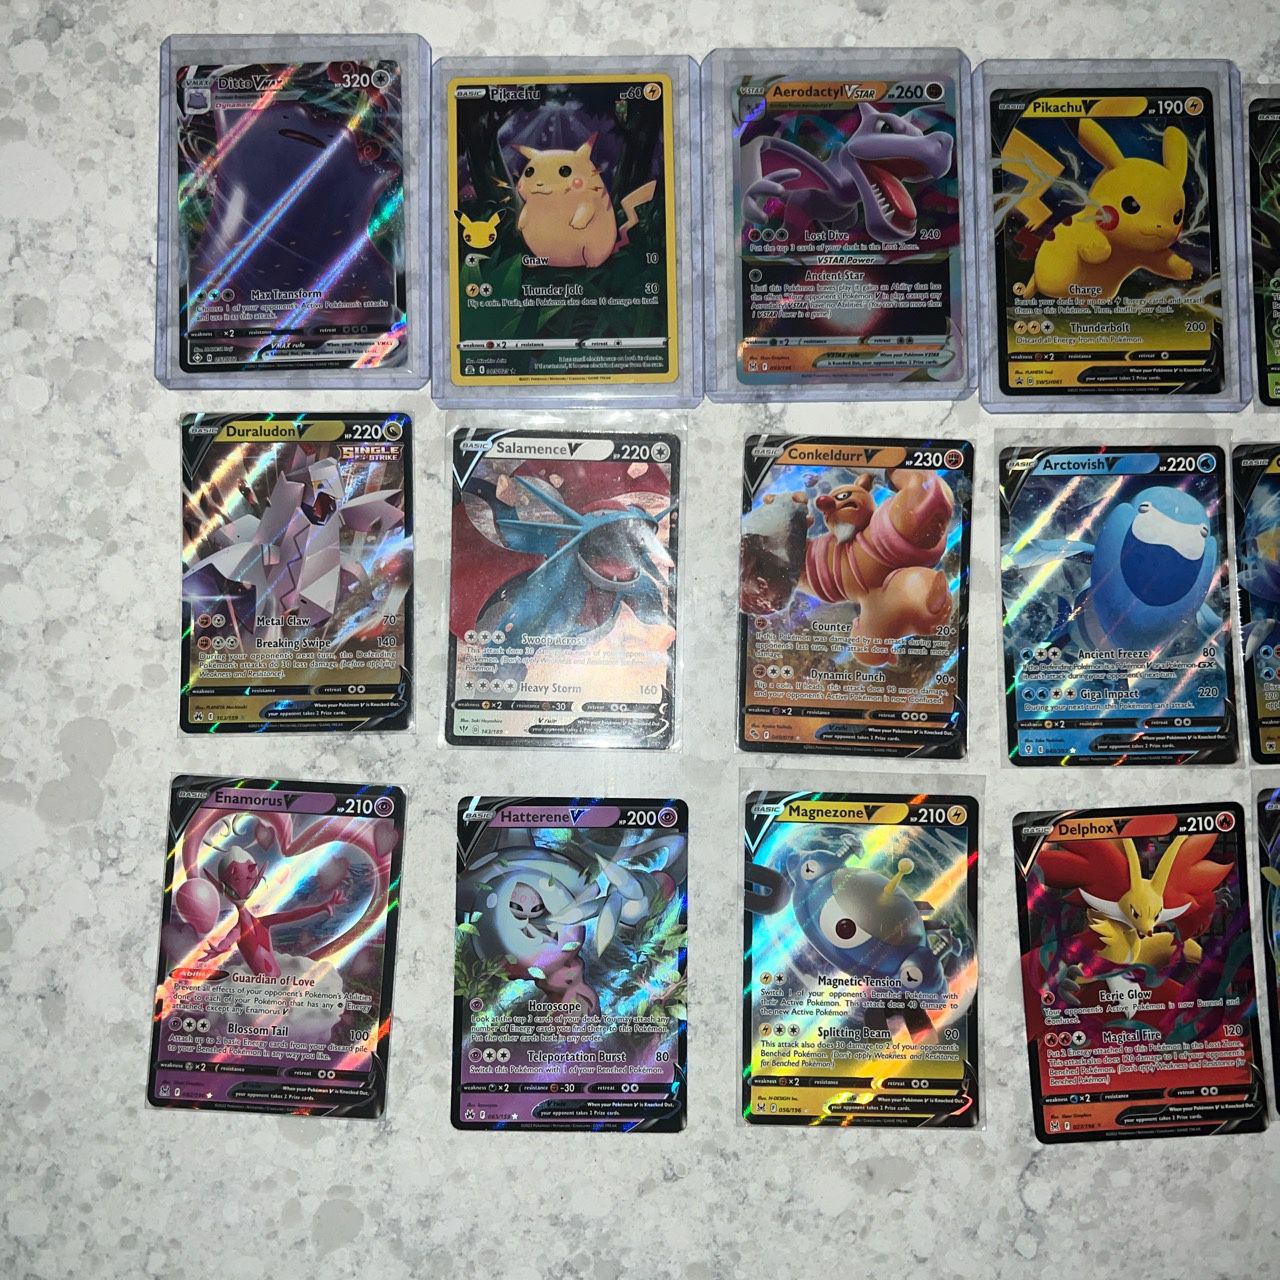 Pokemon Trading Cards. + Energy Cards. If Price Is Too High Give Me A Reasonable Offer. Buy It All Or Message Me Want Cards You Want Specifically.